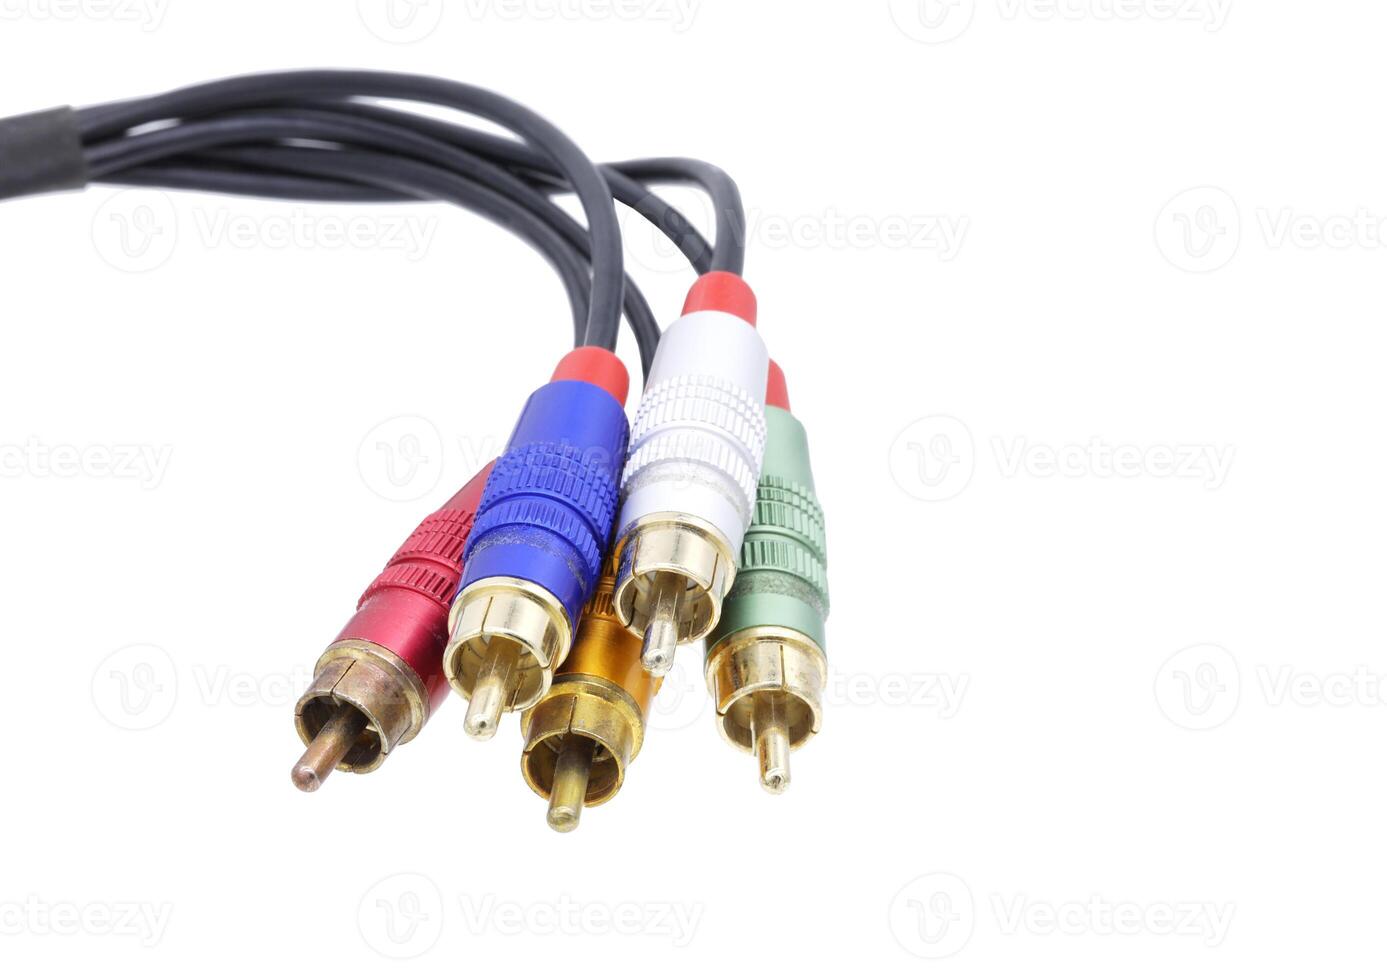 Multicolored AV cable connectors isolated on white background. photo